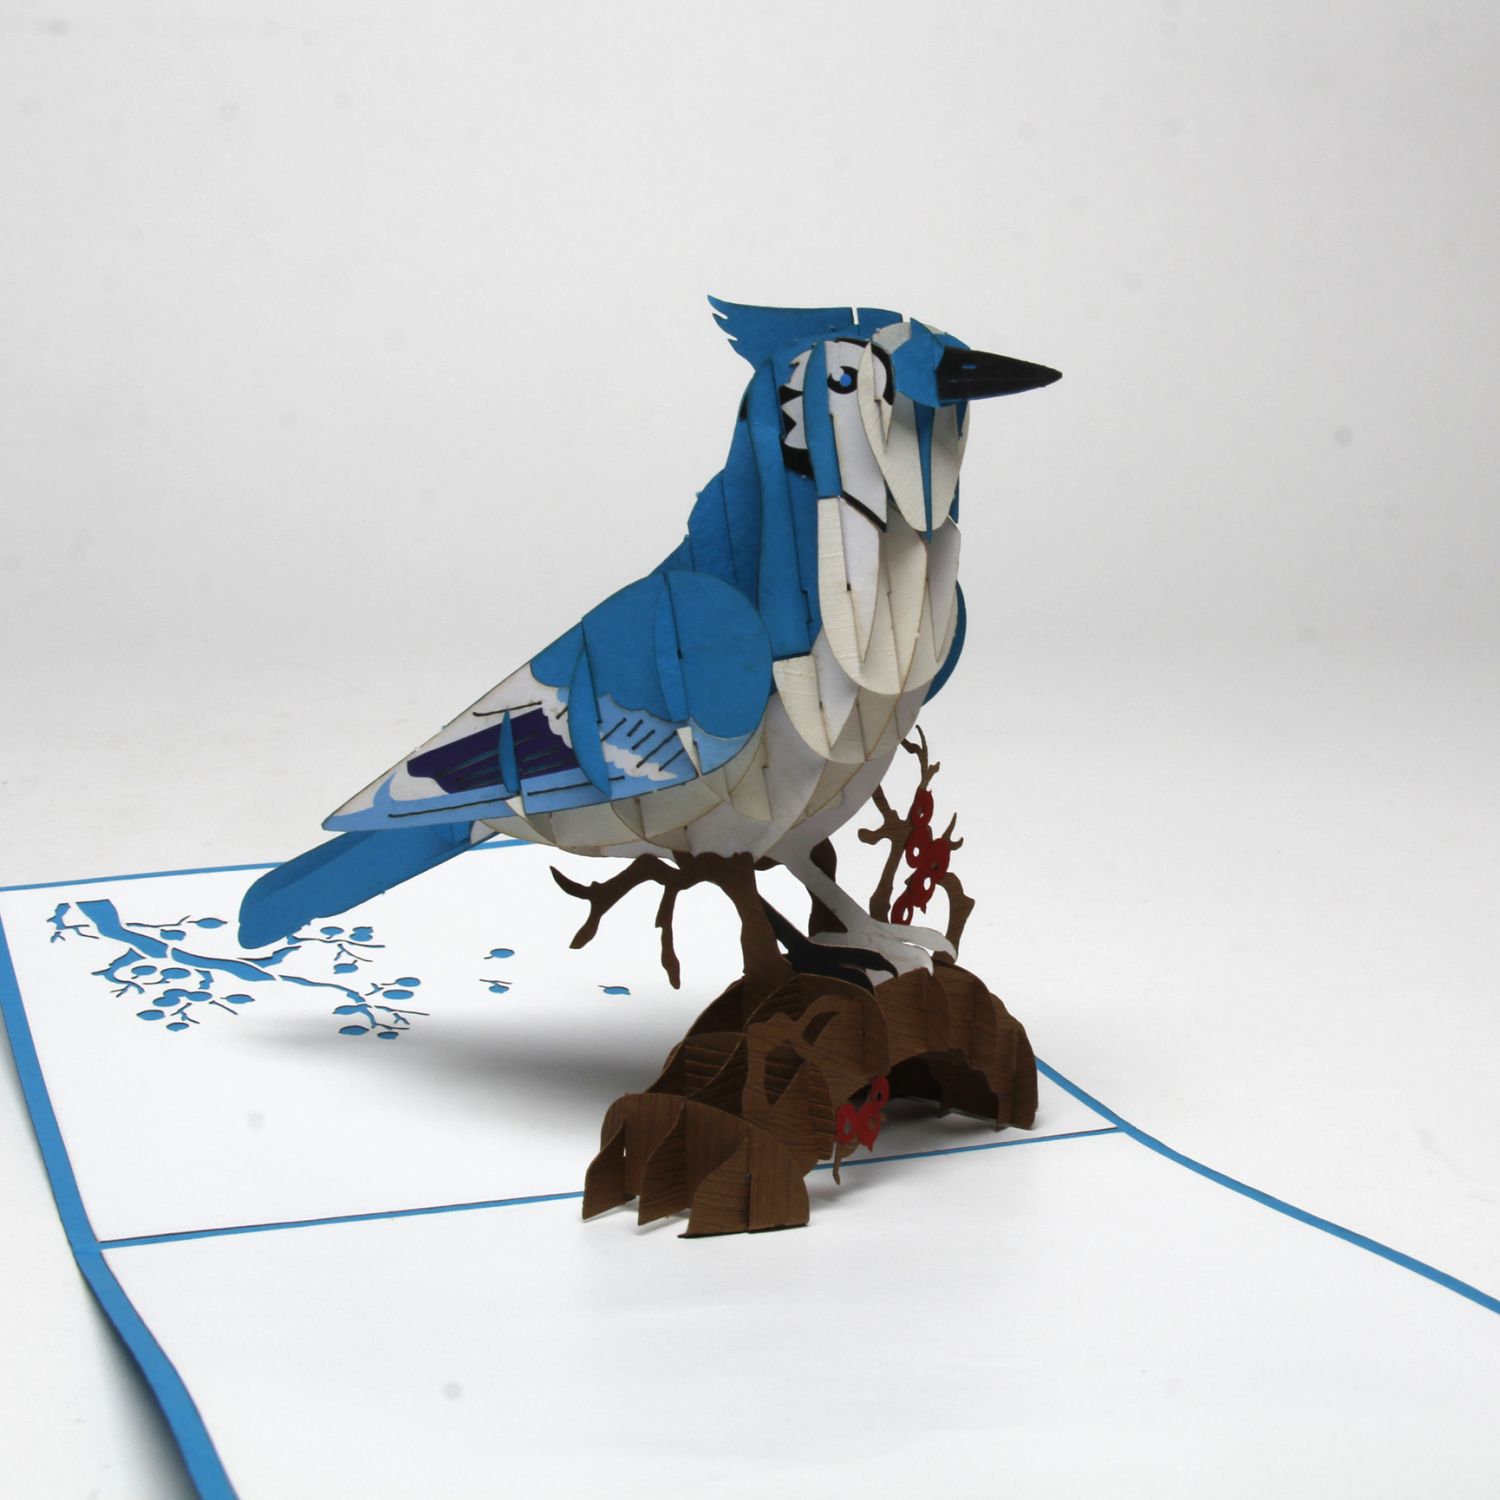 Roses without Thorns: Blue Jay Product Image 1 of 3